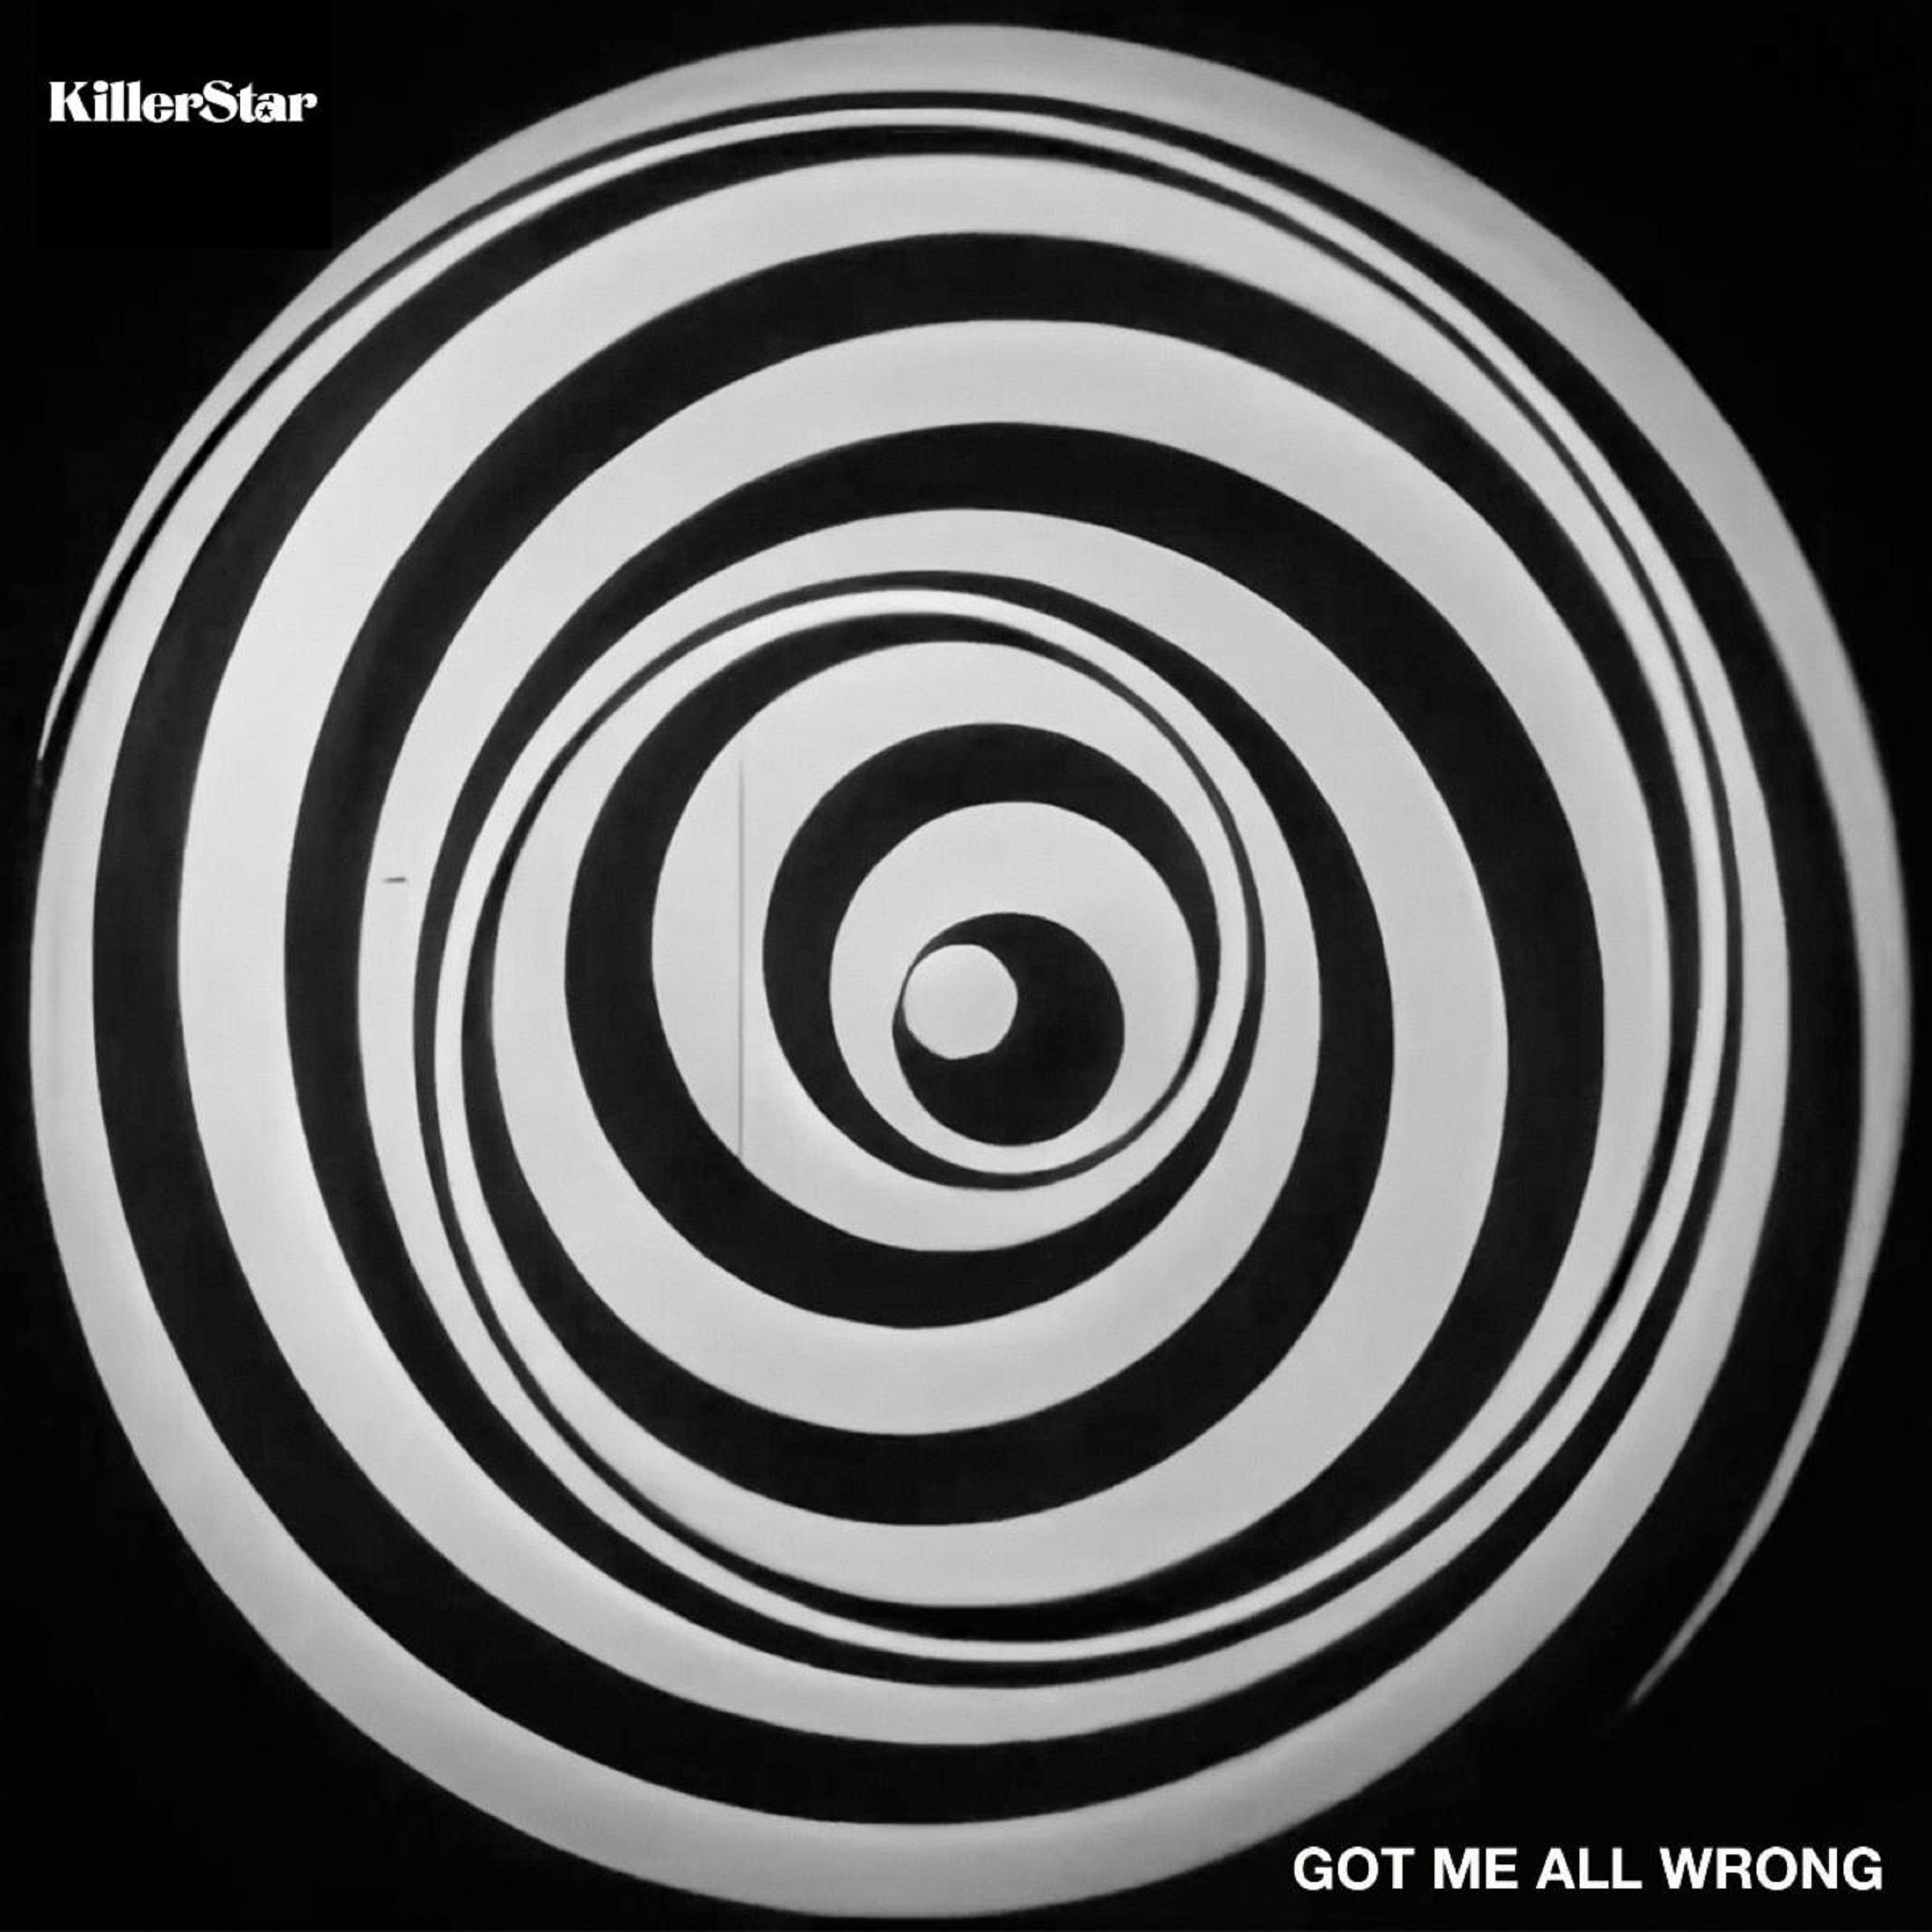 KillerStar Share The New Single “Got Me All Wrong” From Their Self-Titled Debut Album Out 3/1